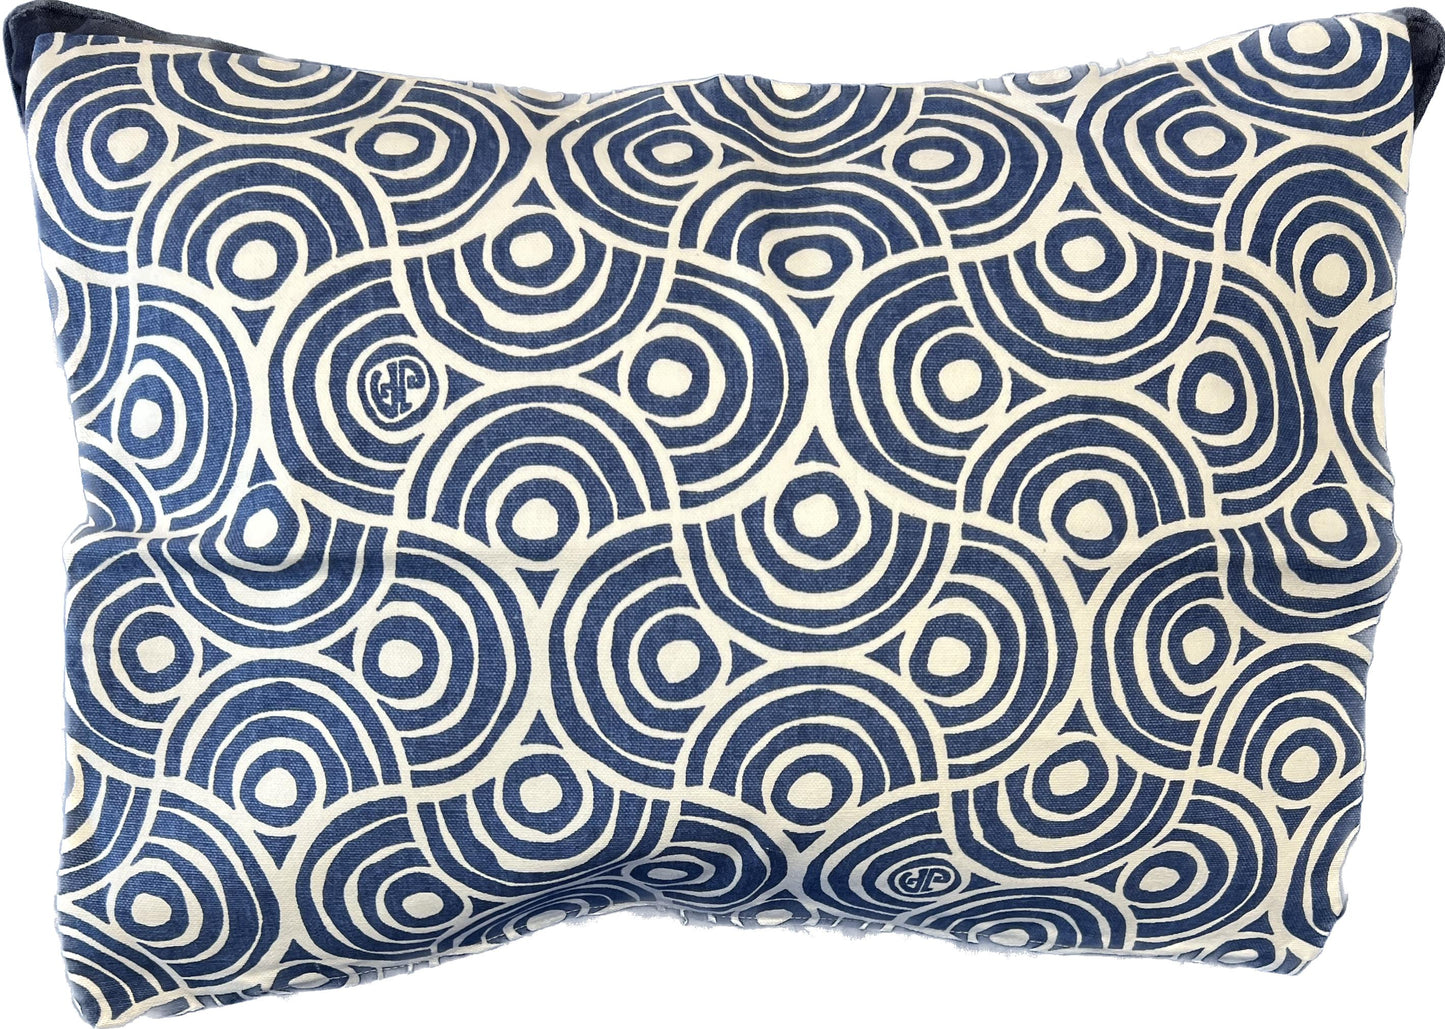 14"x18"  Swirl Circle Pillow Cover *** Special Price***